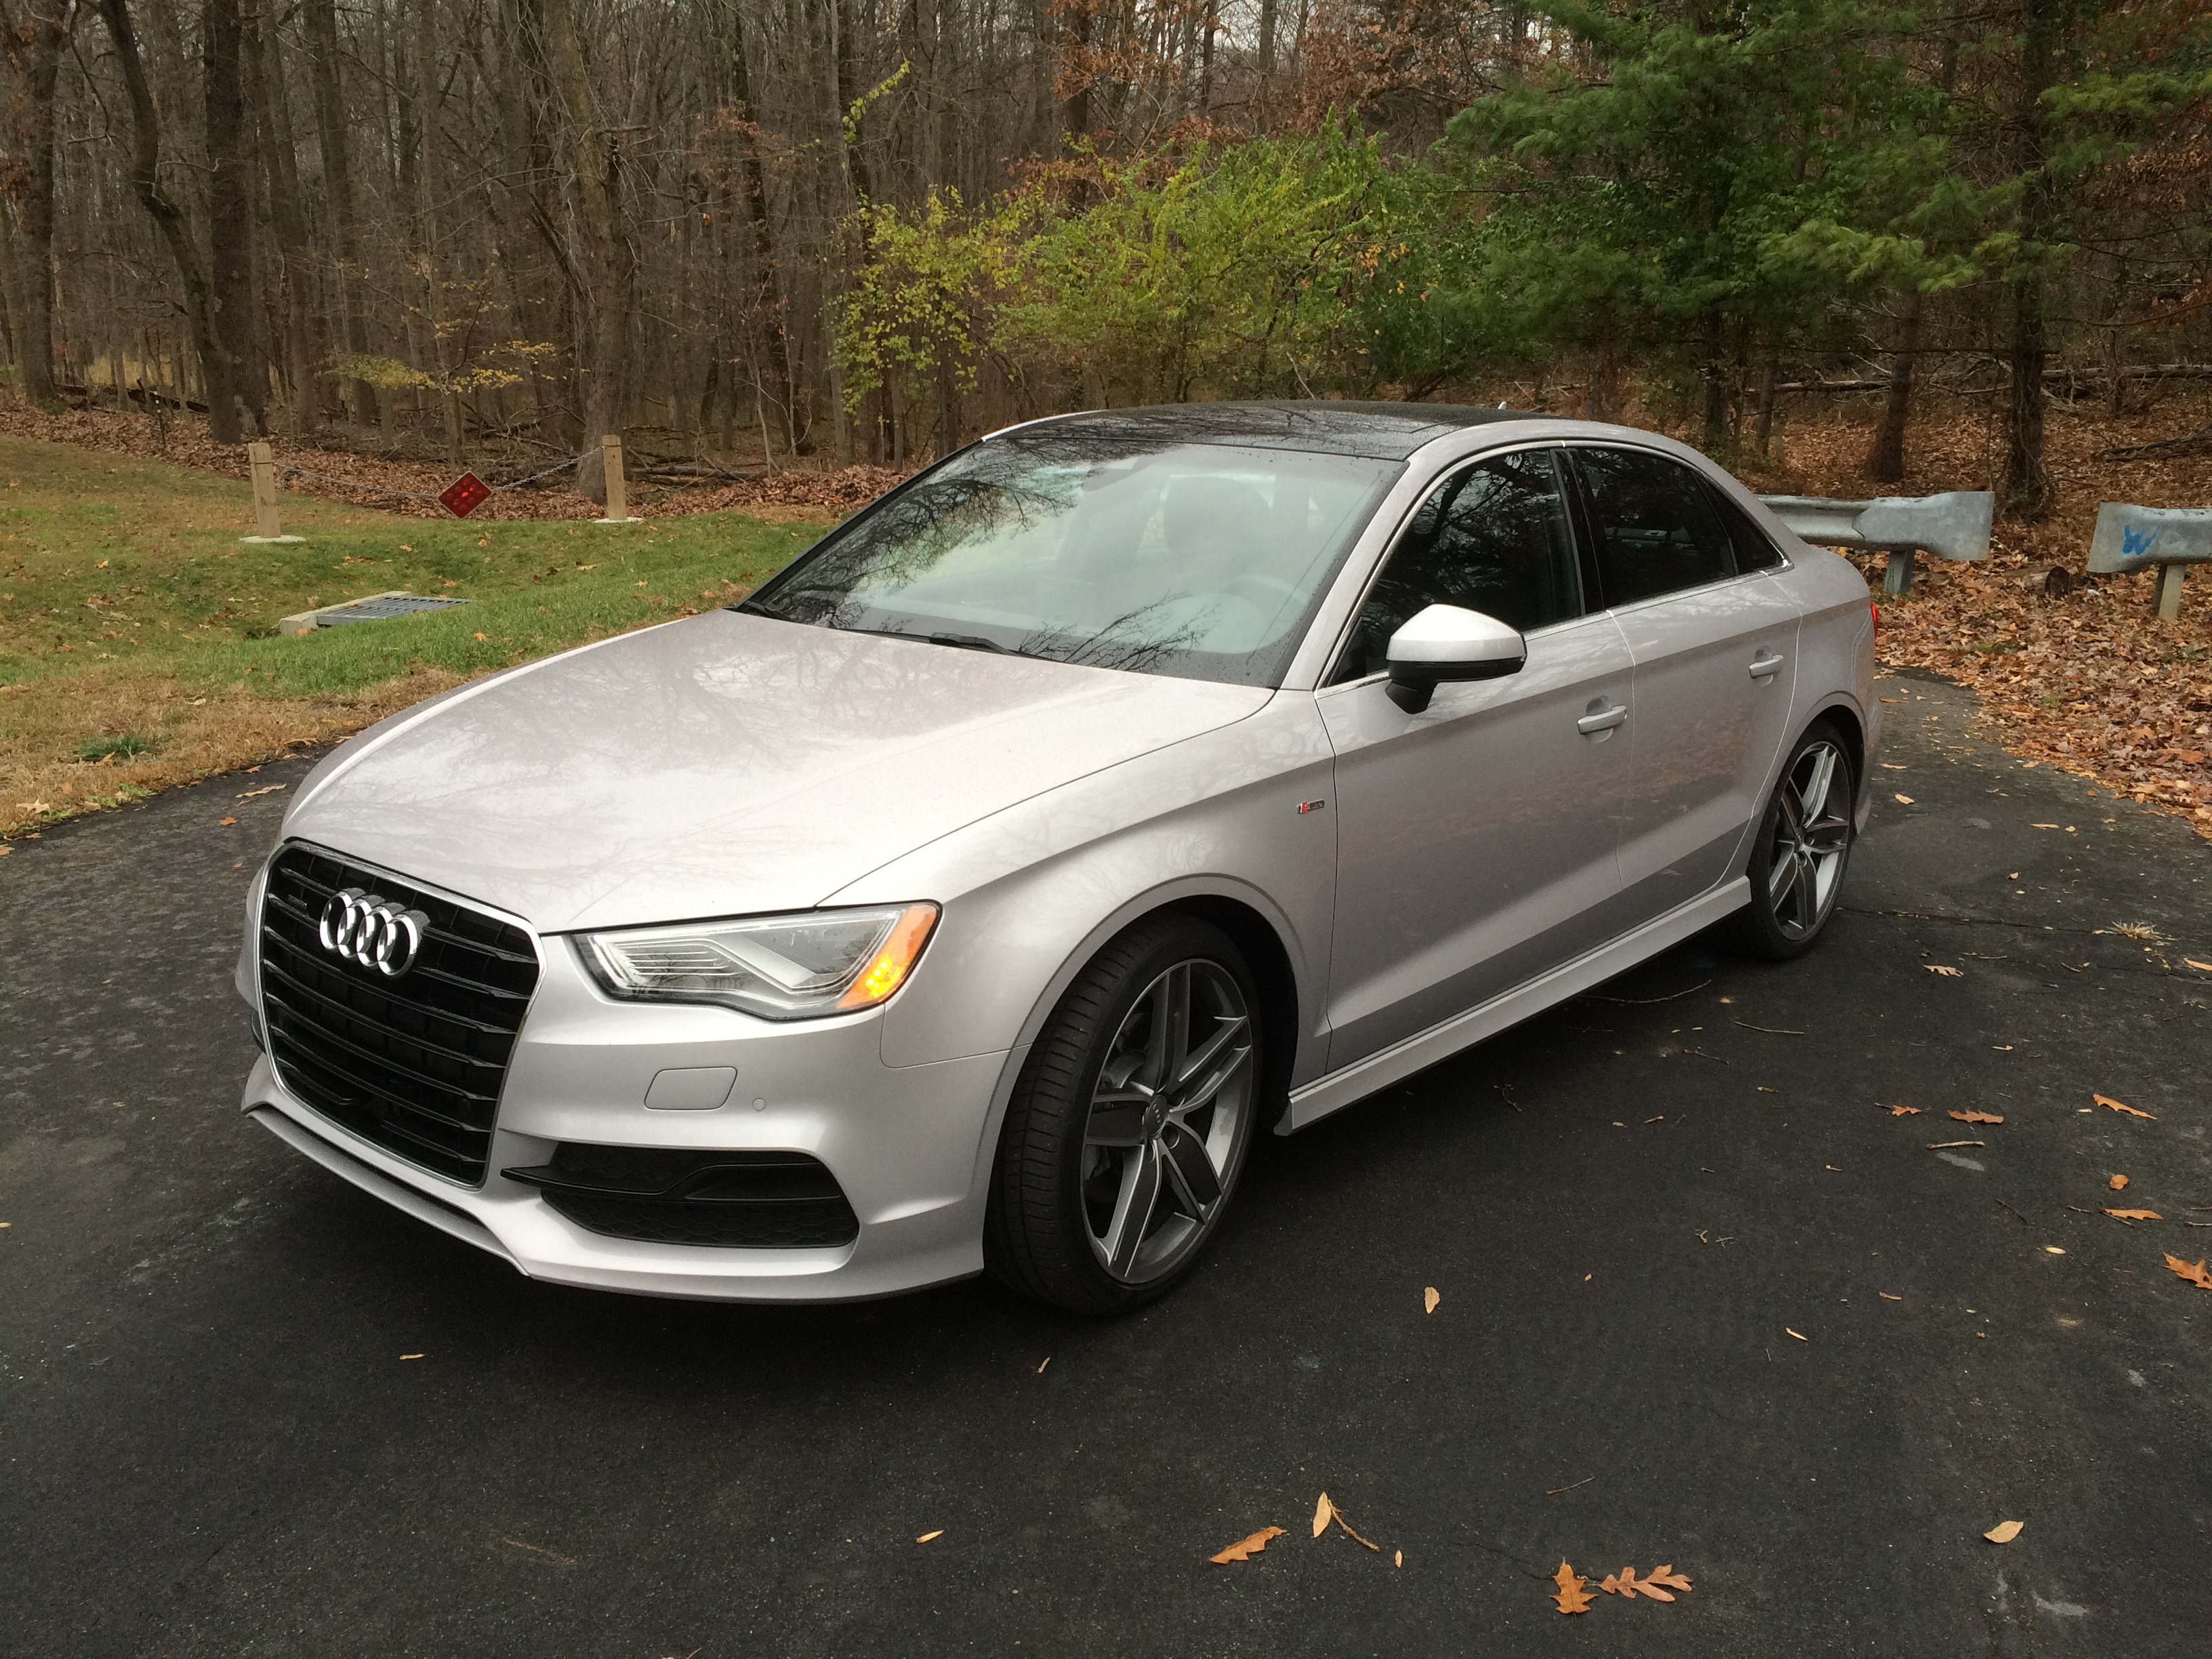 Audi A3 2.0T Quattro doesn’t look or feel like the entry-level luxury car it is